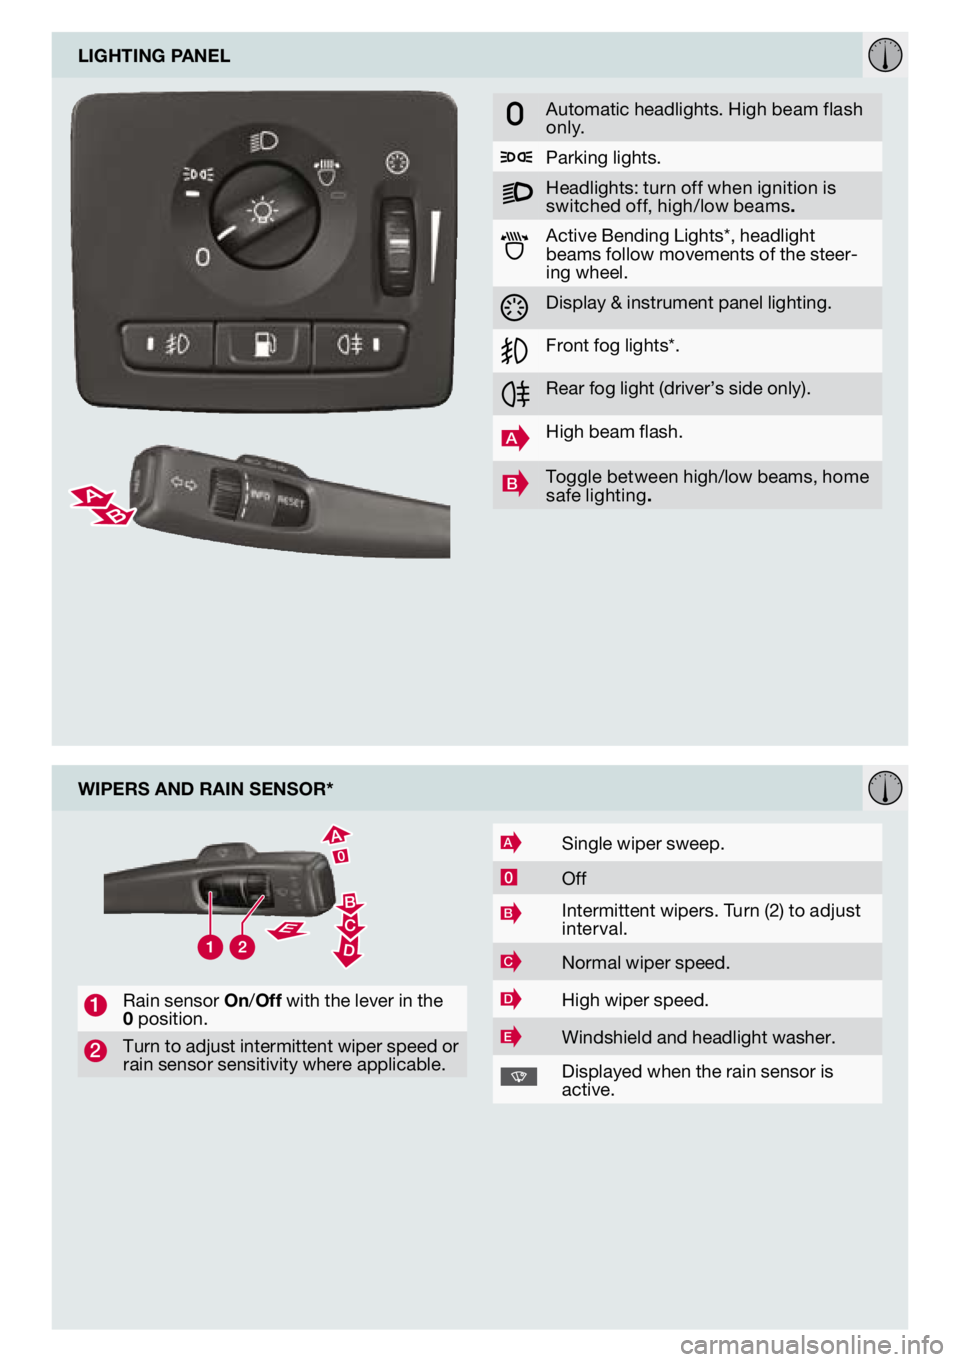 VOLVO S40 2010  Quick Guide 
lIghtIng panel
automatic headlights. High beam flash only.
Parking lights.
Headlights: turn off when ignition is switched off, high/low beams.
active bending  lights*, headlight beams follow movement